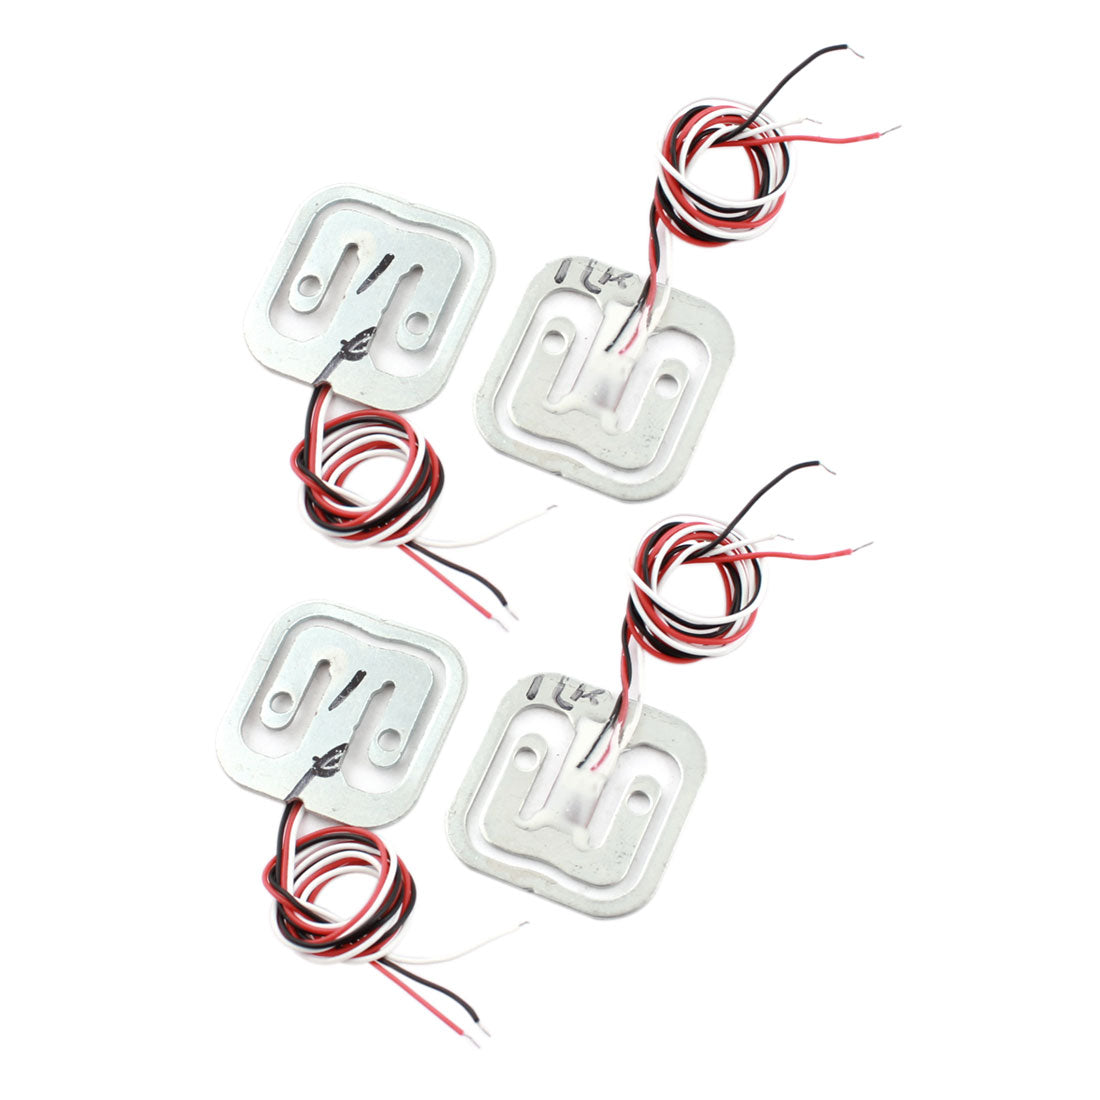 uxcell Uxcell 4Pcs 4x5Kg 8" 3-Wired Half Bridge Scale Electronic Weighing Resistance Train Sensor